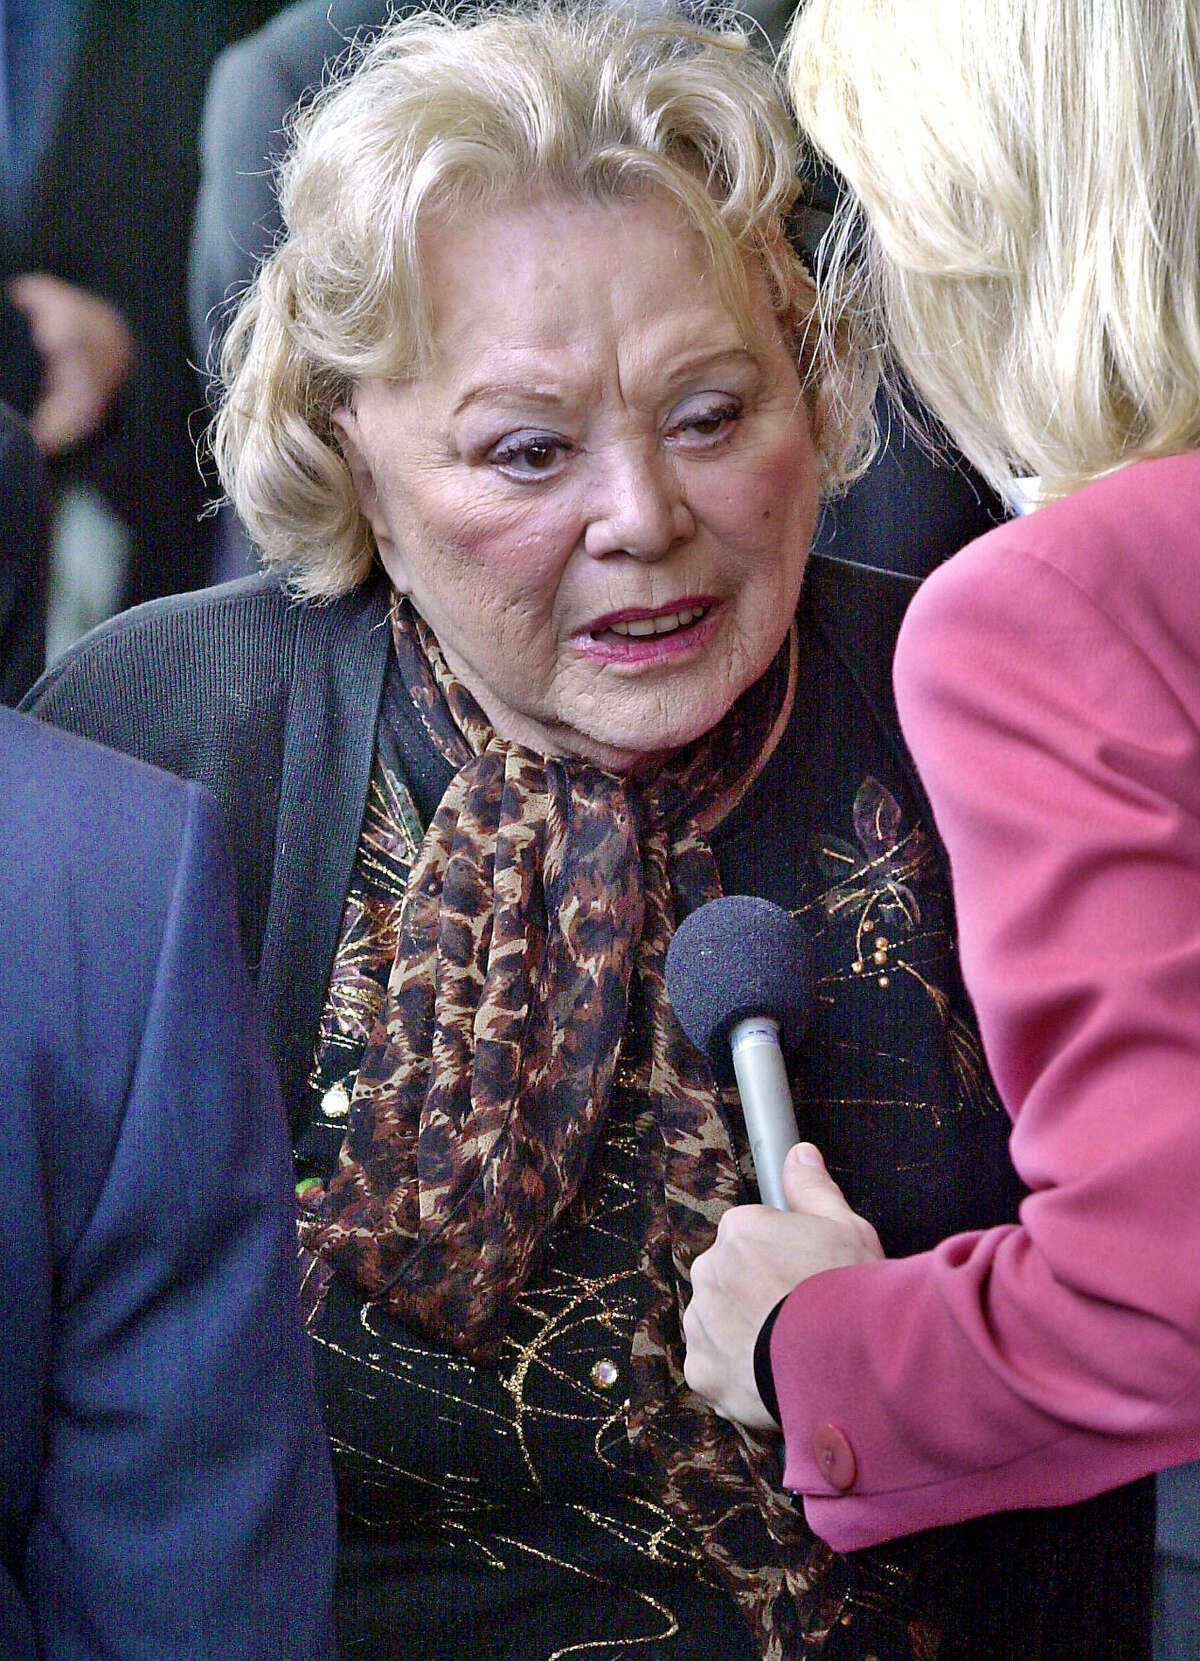 FILE- In this April 1, 2002, file photo, actress and comedian Rose Marie talks to the press as she arrives for a ceremony honoring comedian Milton Berle at Hillside Memorial Park and Mortuary in Los Angeles. Family spokesman Harlan Boll said Marie, the wisecracking Sally Rogers of ?“The Dick Van Dyke Show,?” died Thursday, Dec. 28, 2017. She was 94. (AP Photo/Nick Ut, File)